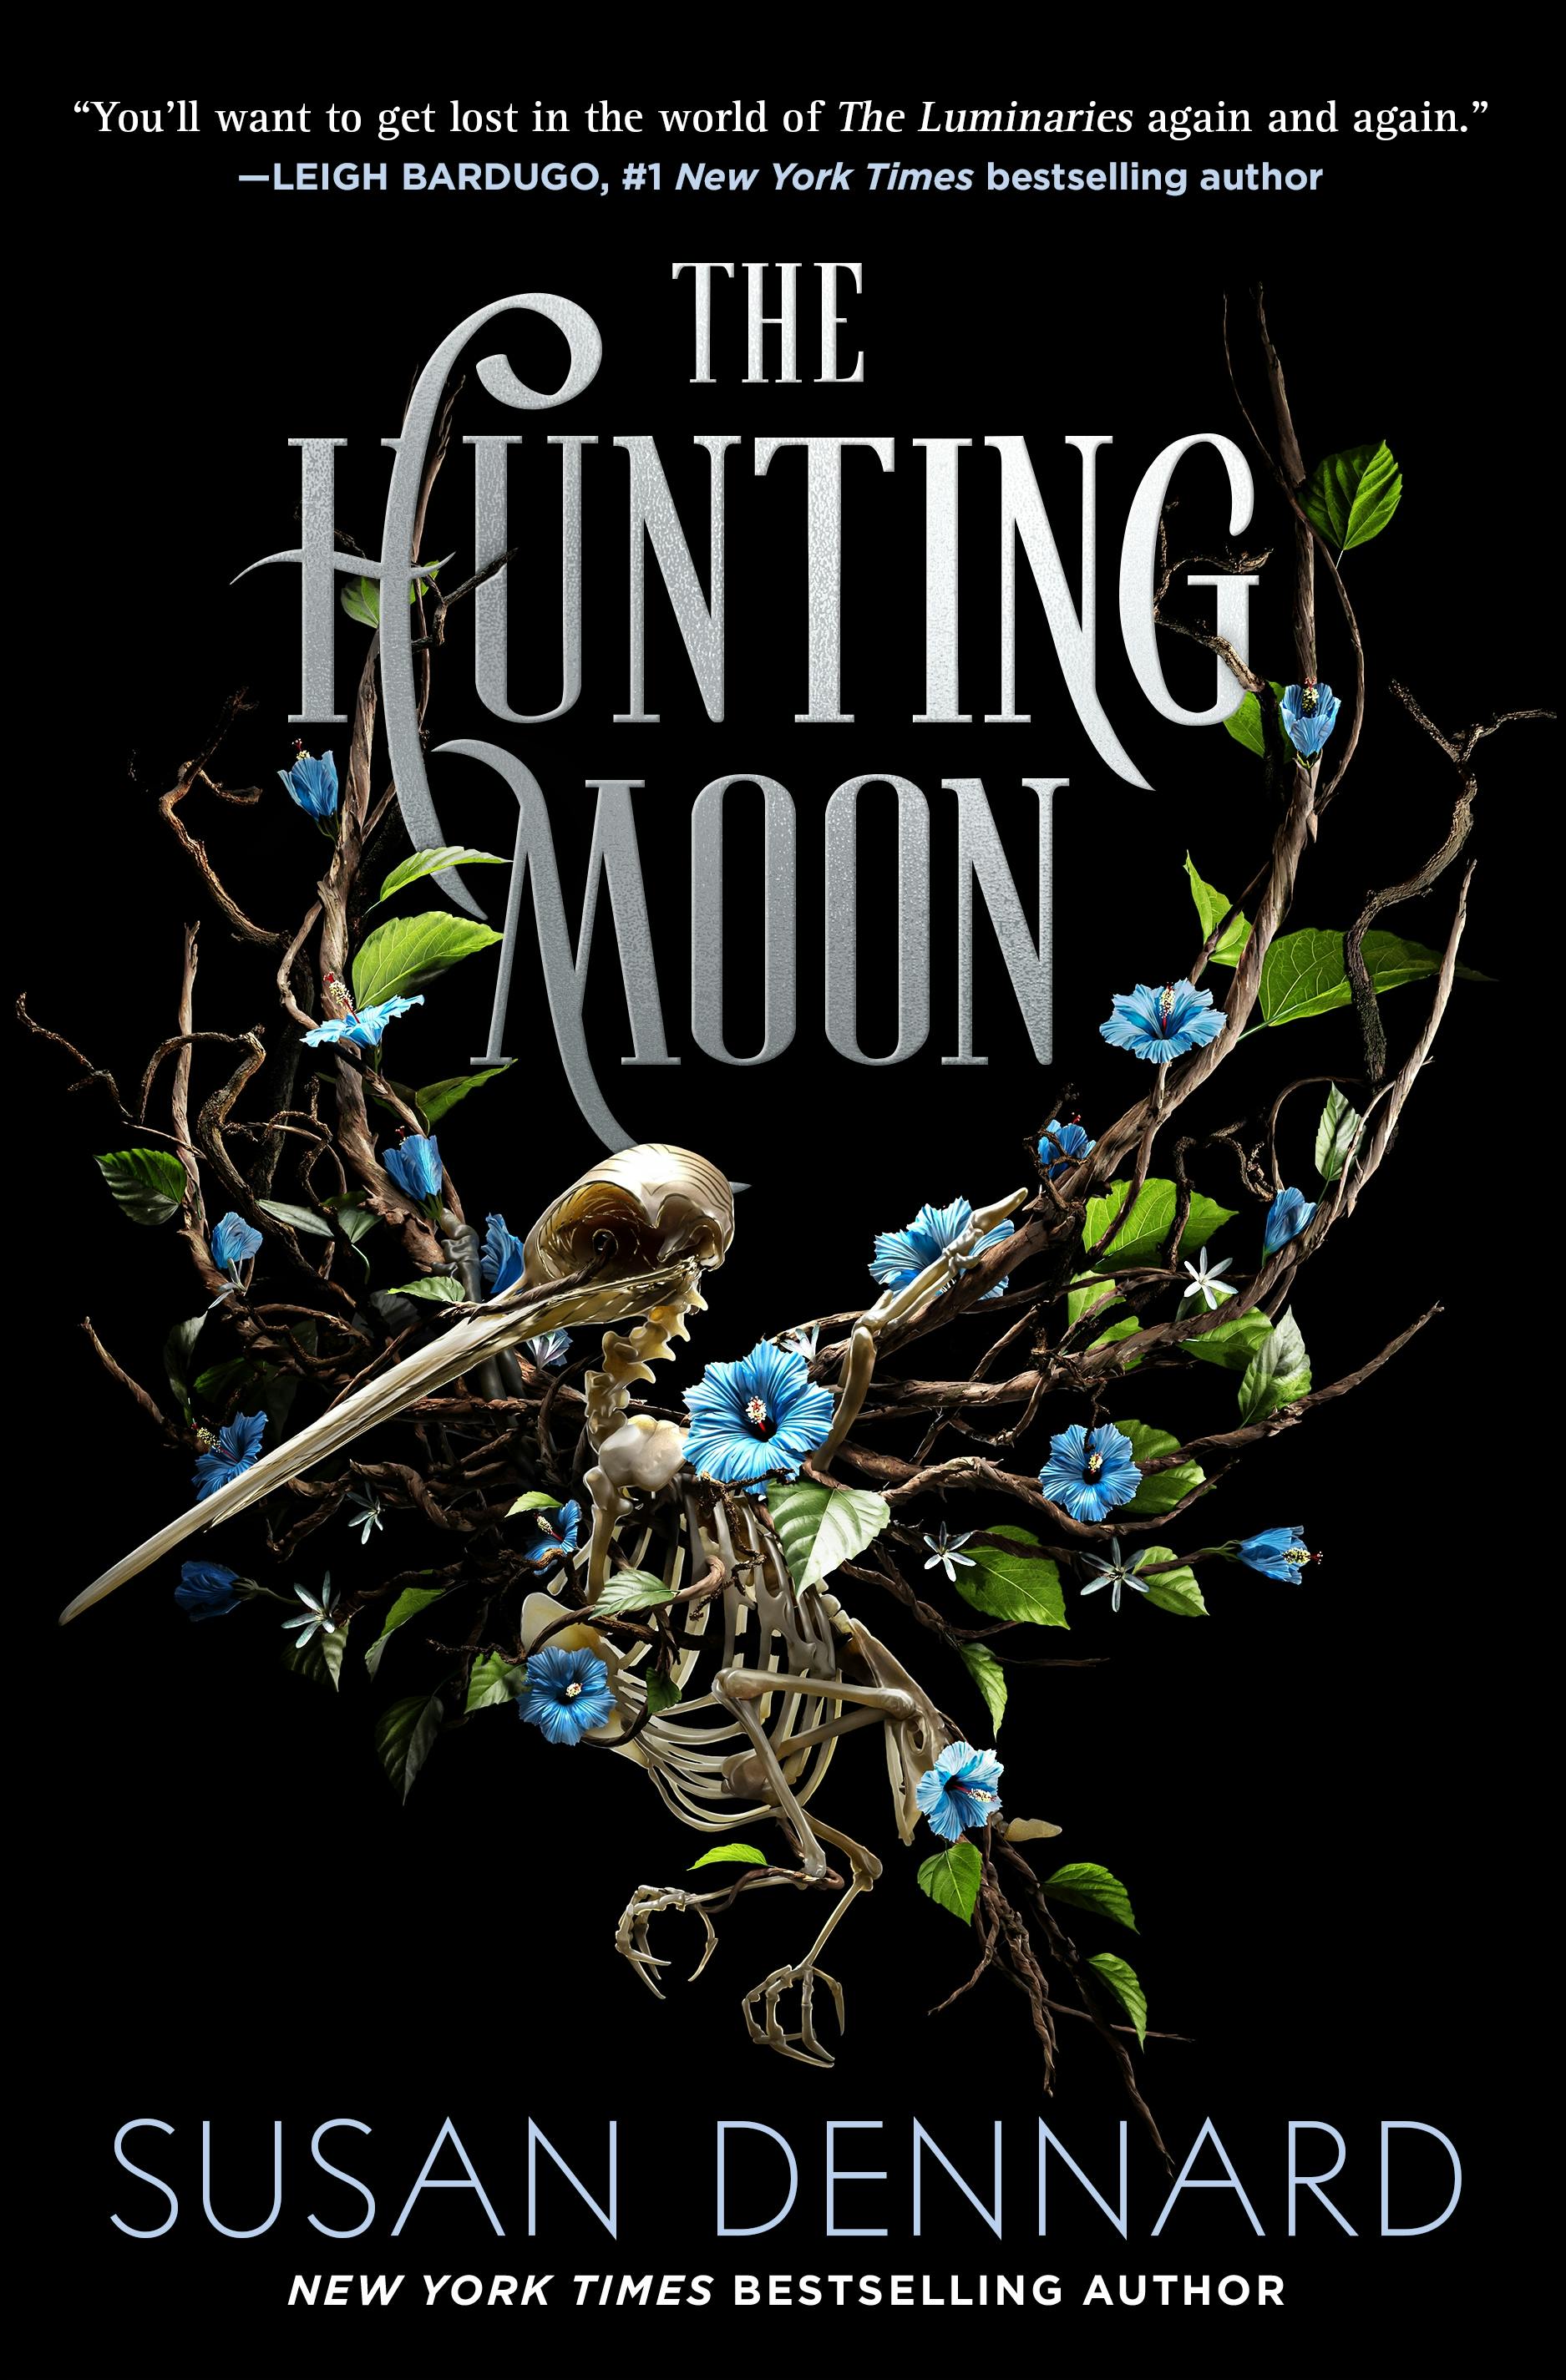 Image of The Hunting Moon